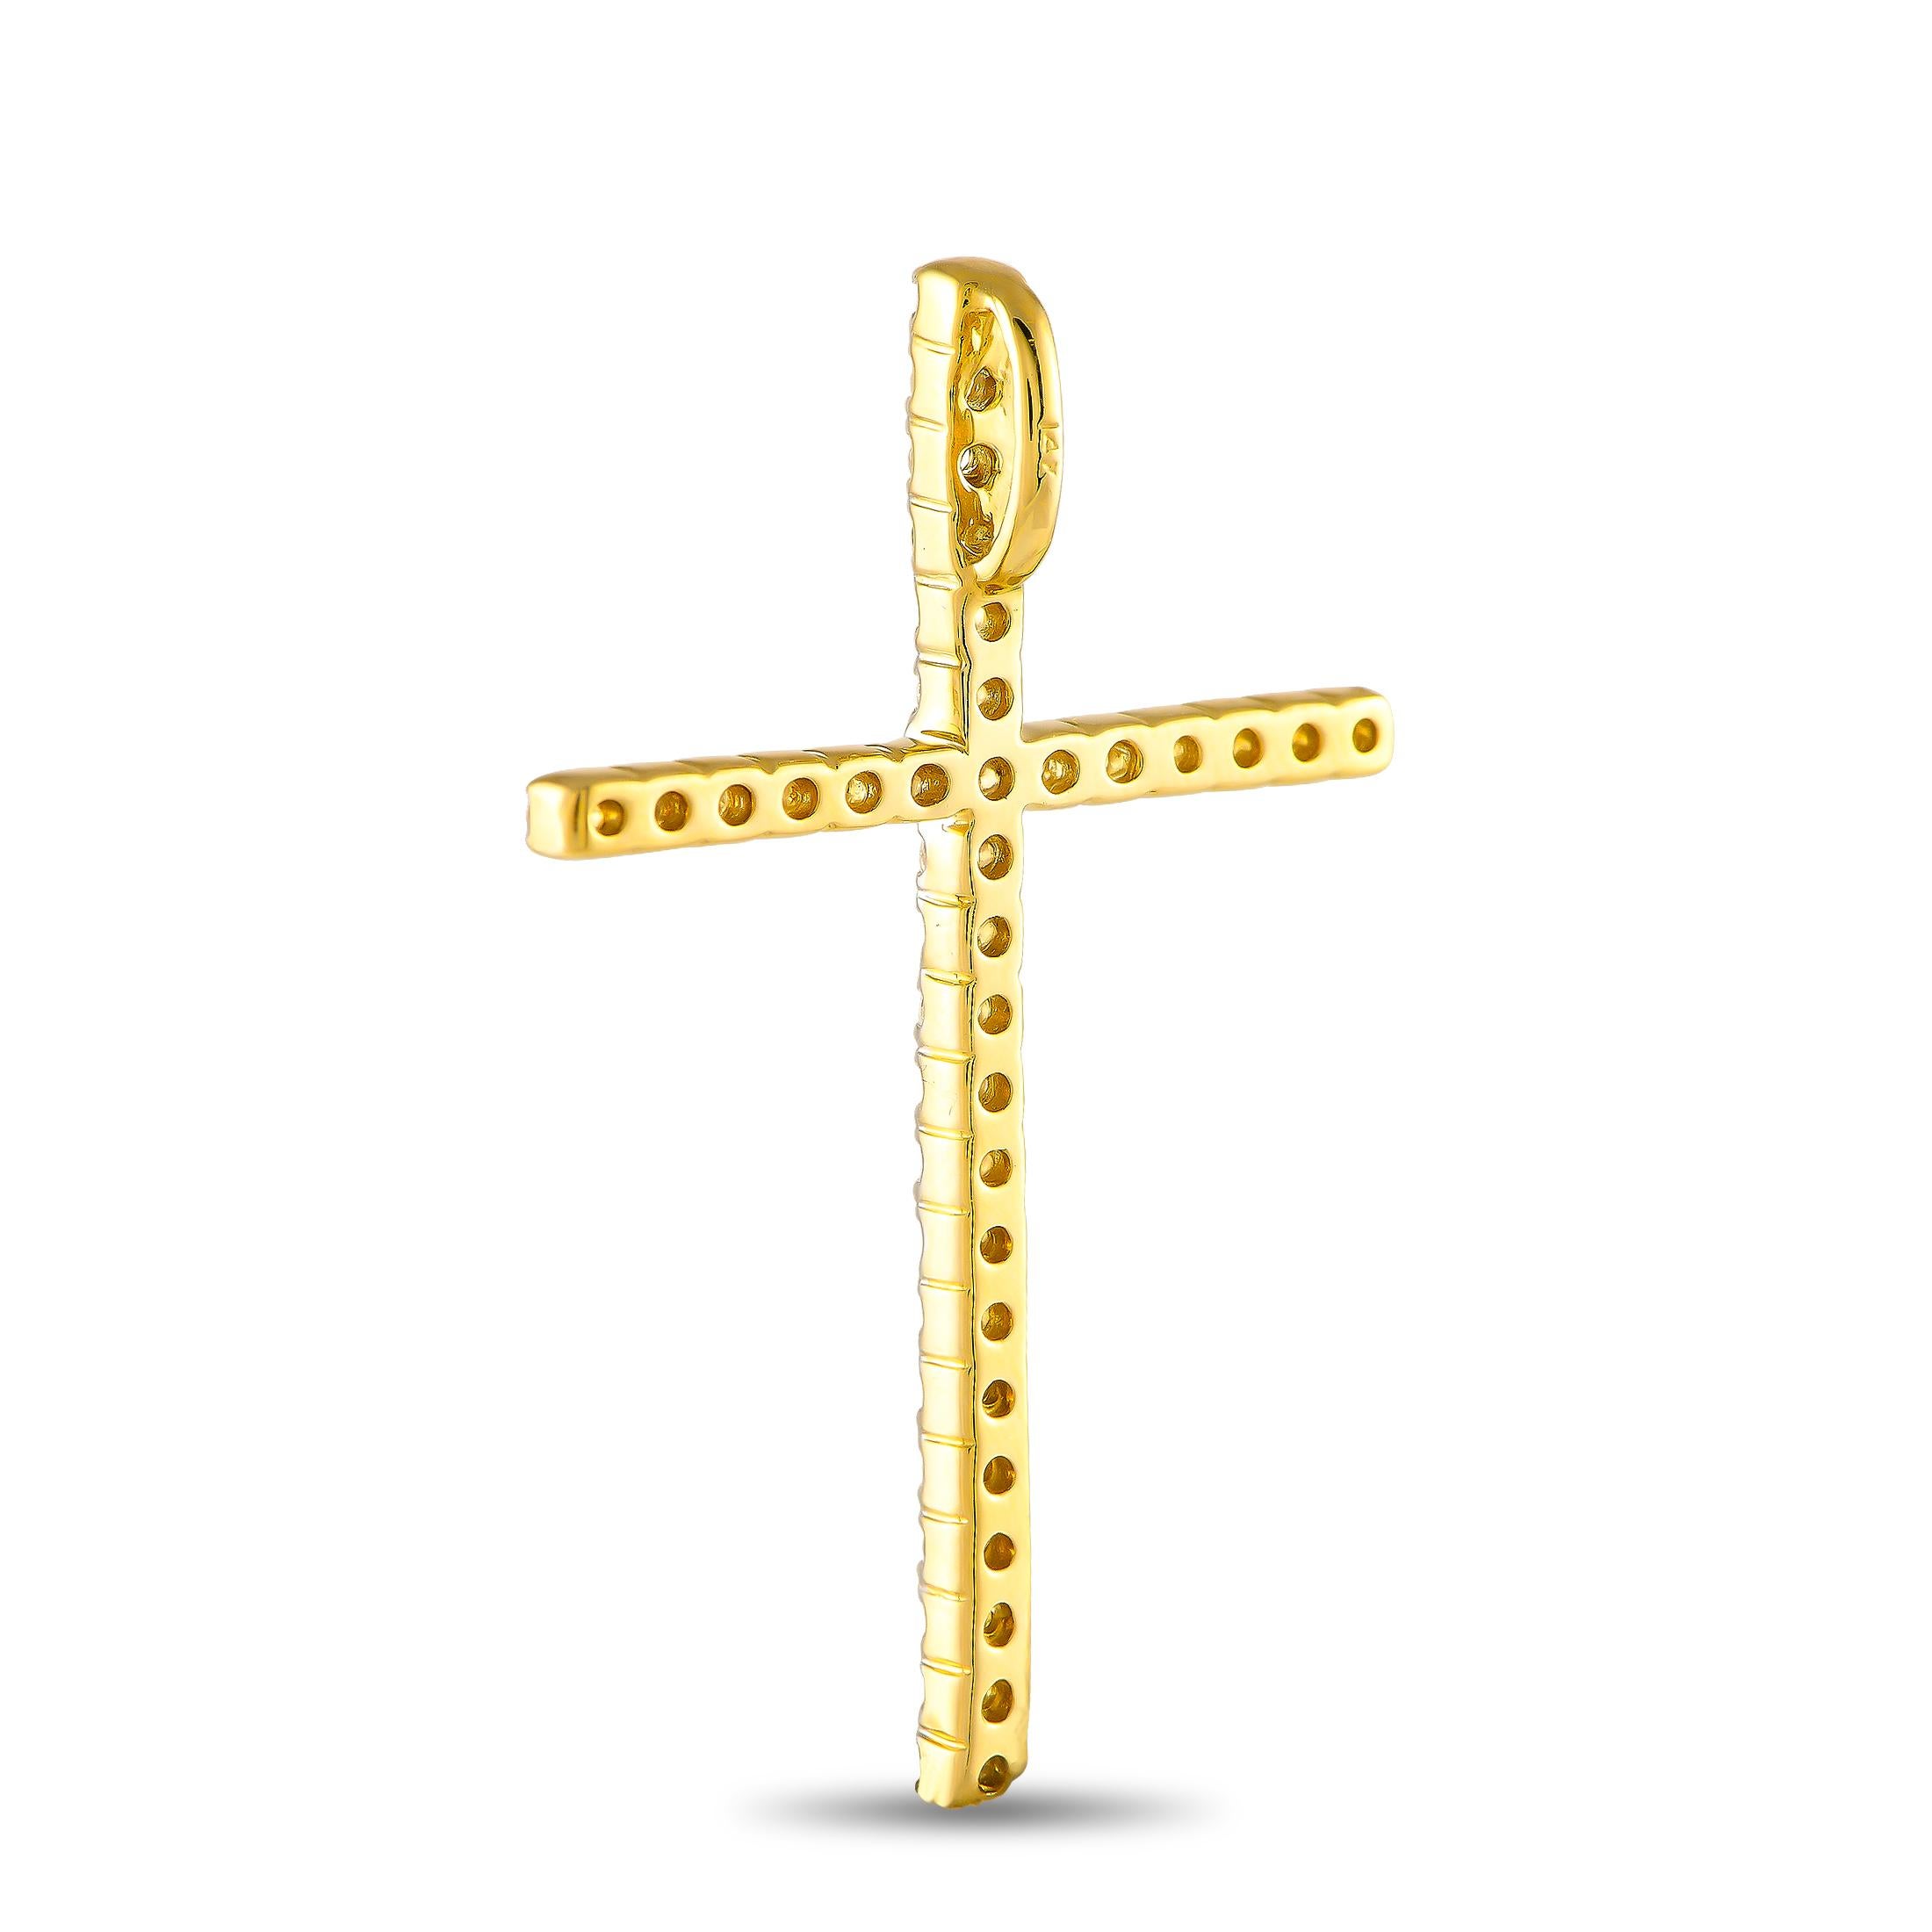 Brilliantly display your belief with this diamond cross necklace. This sparkling symbol of faith features a 1.5 by 1.0 slim cross pendant traced by round diamonds on shared prongs.This brand new 14K Yellow Gold 0.75ct Diamond Cross Pendant comes